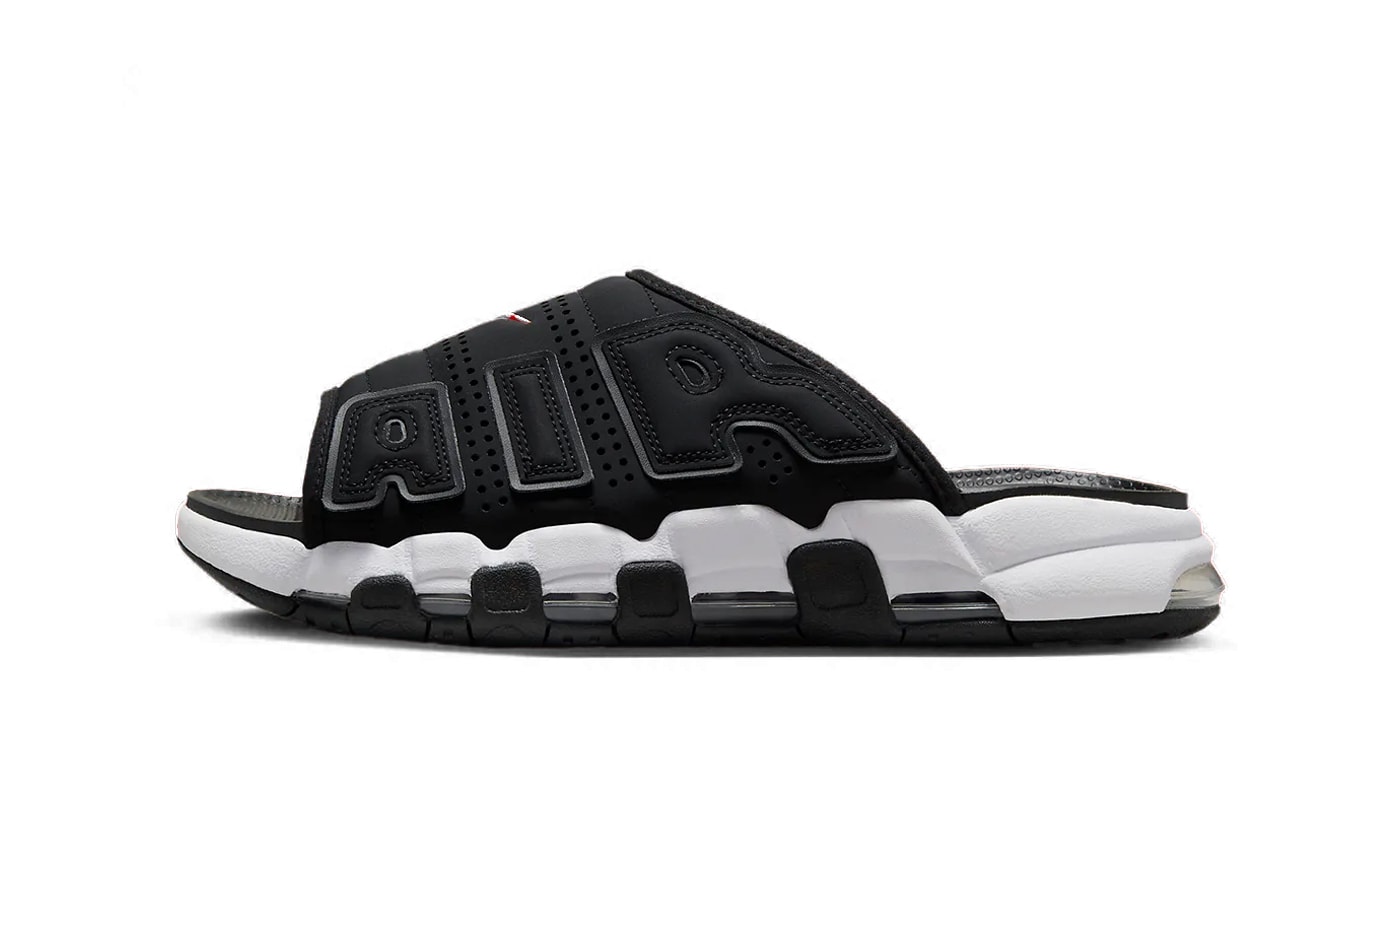 Nike Air More Uptempo Slide Arrives in Blacked-Out Lettering FJ2708-001 Release Info sandals pool beach